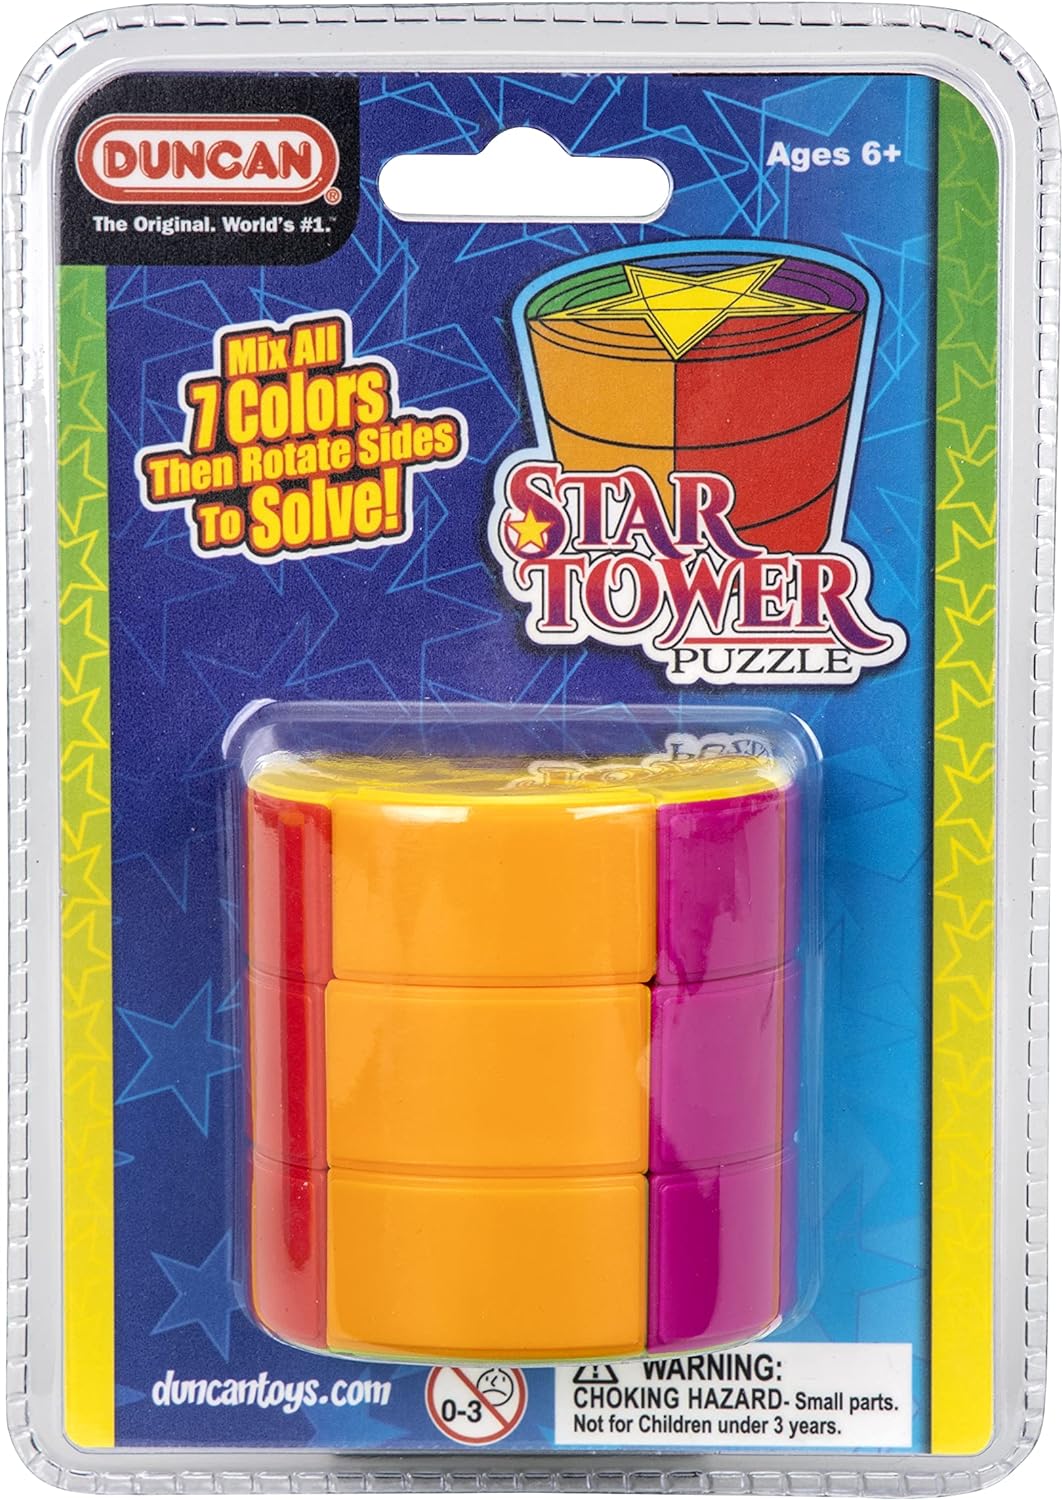 Star Tower Puzzle